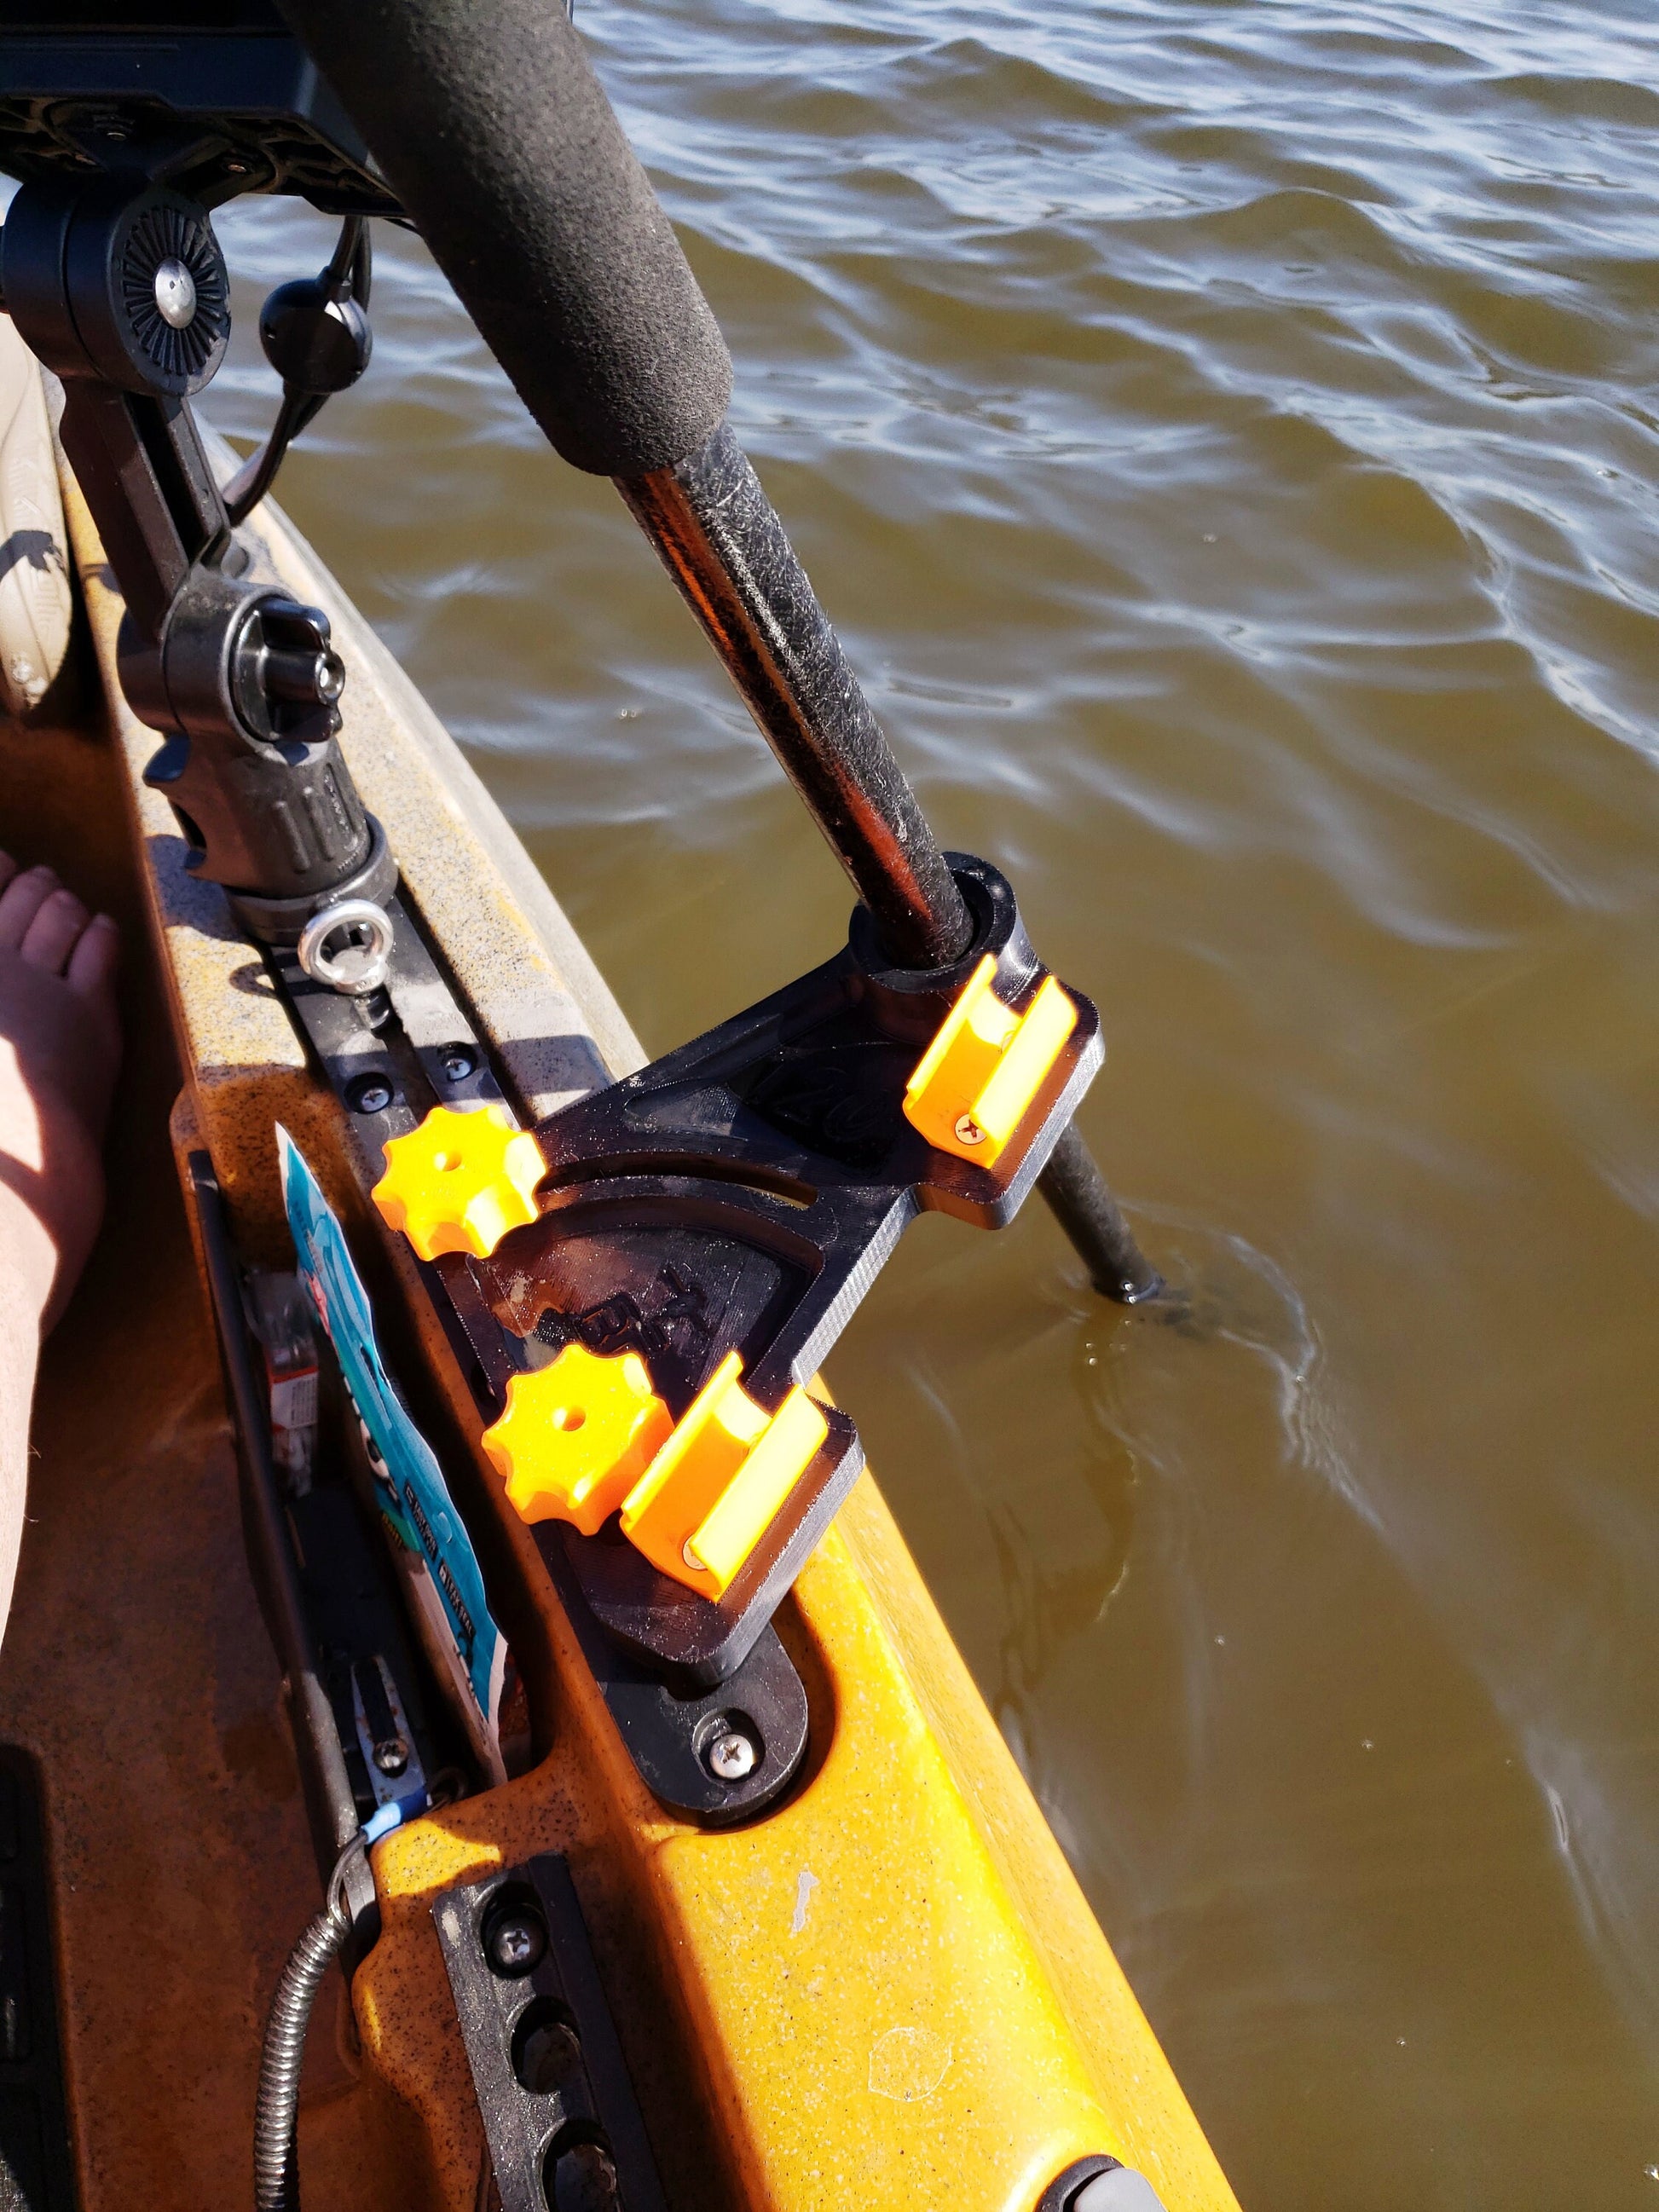 Image of the Stake-n-Stow deployed with a stake holding the kayak